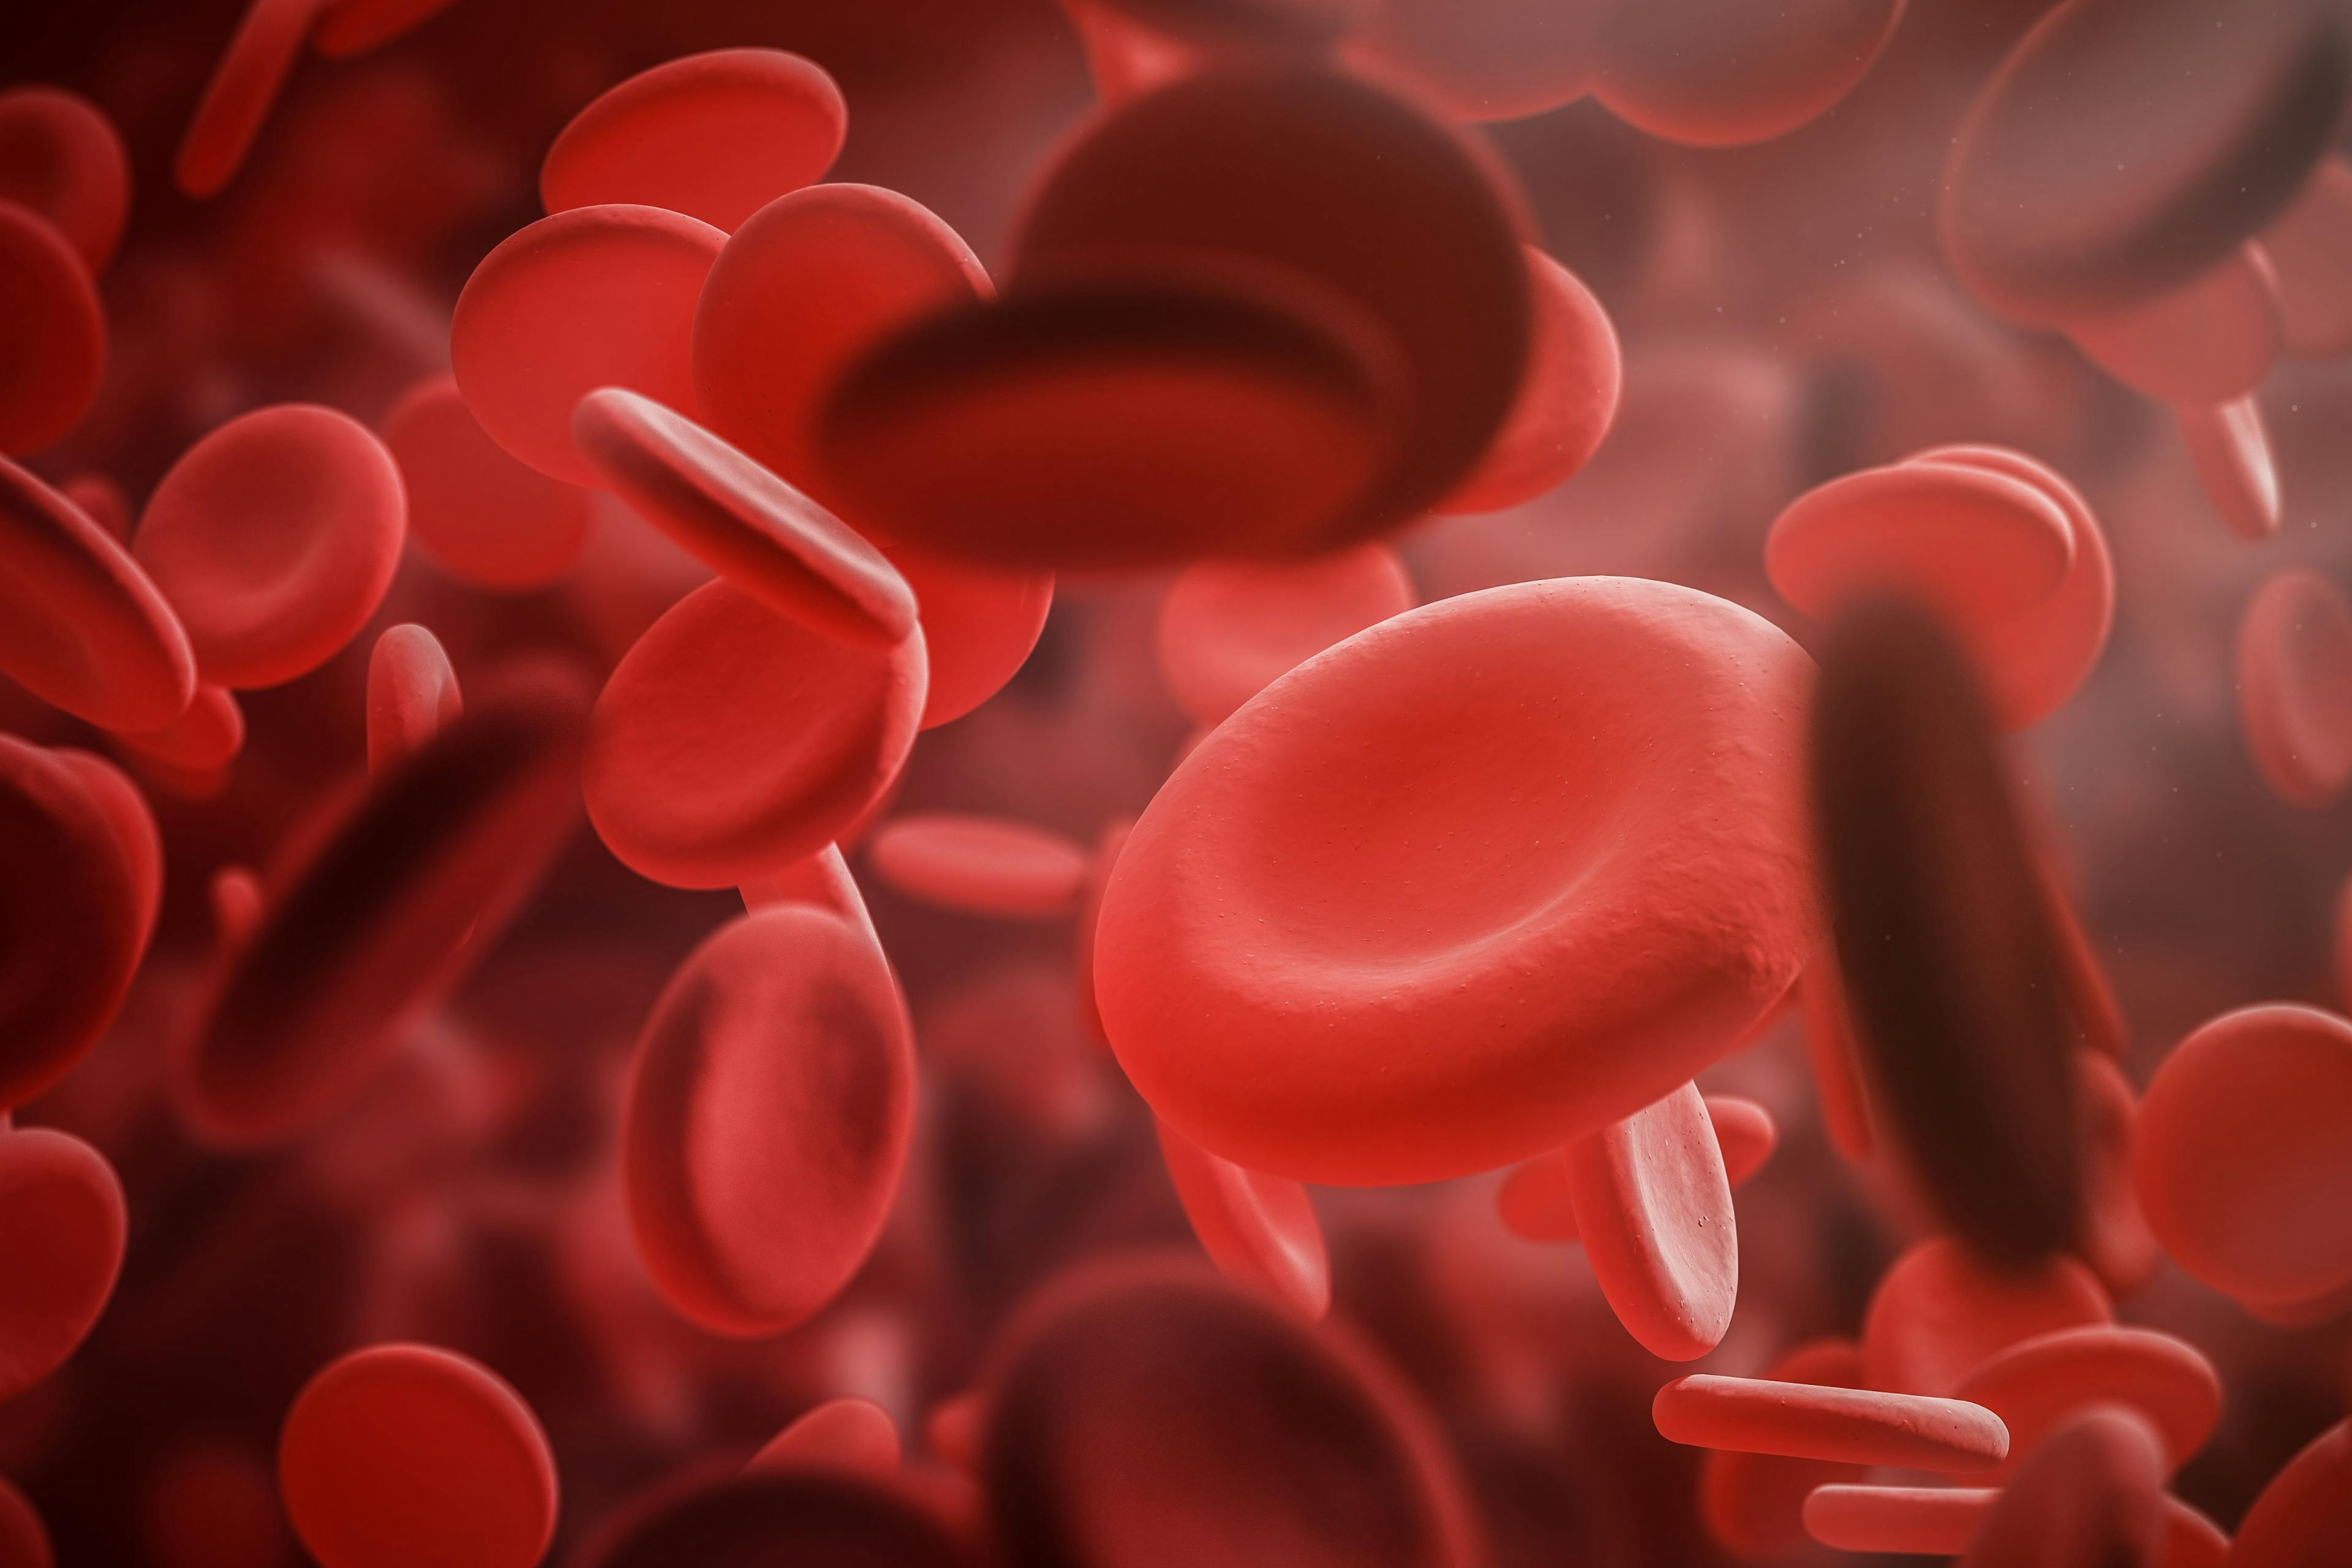 Hematology, MDS, Red Blood Cell | Image Credit: ImageFlow - stock.adobe.com